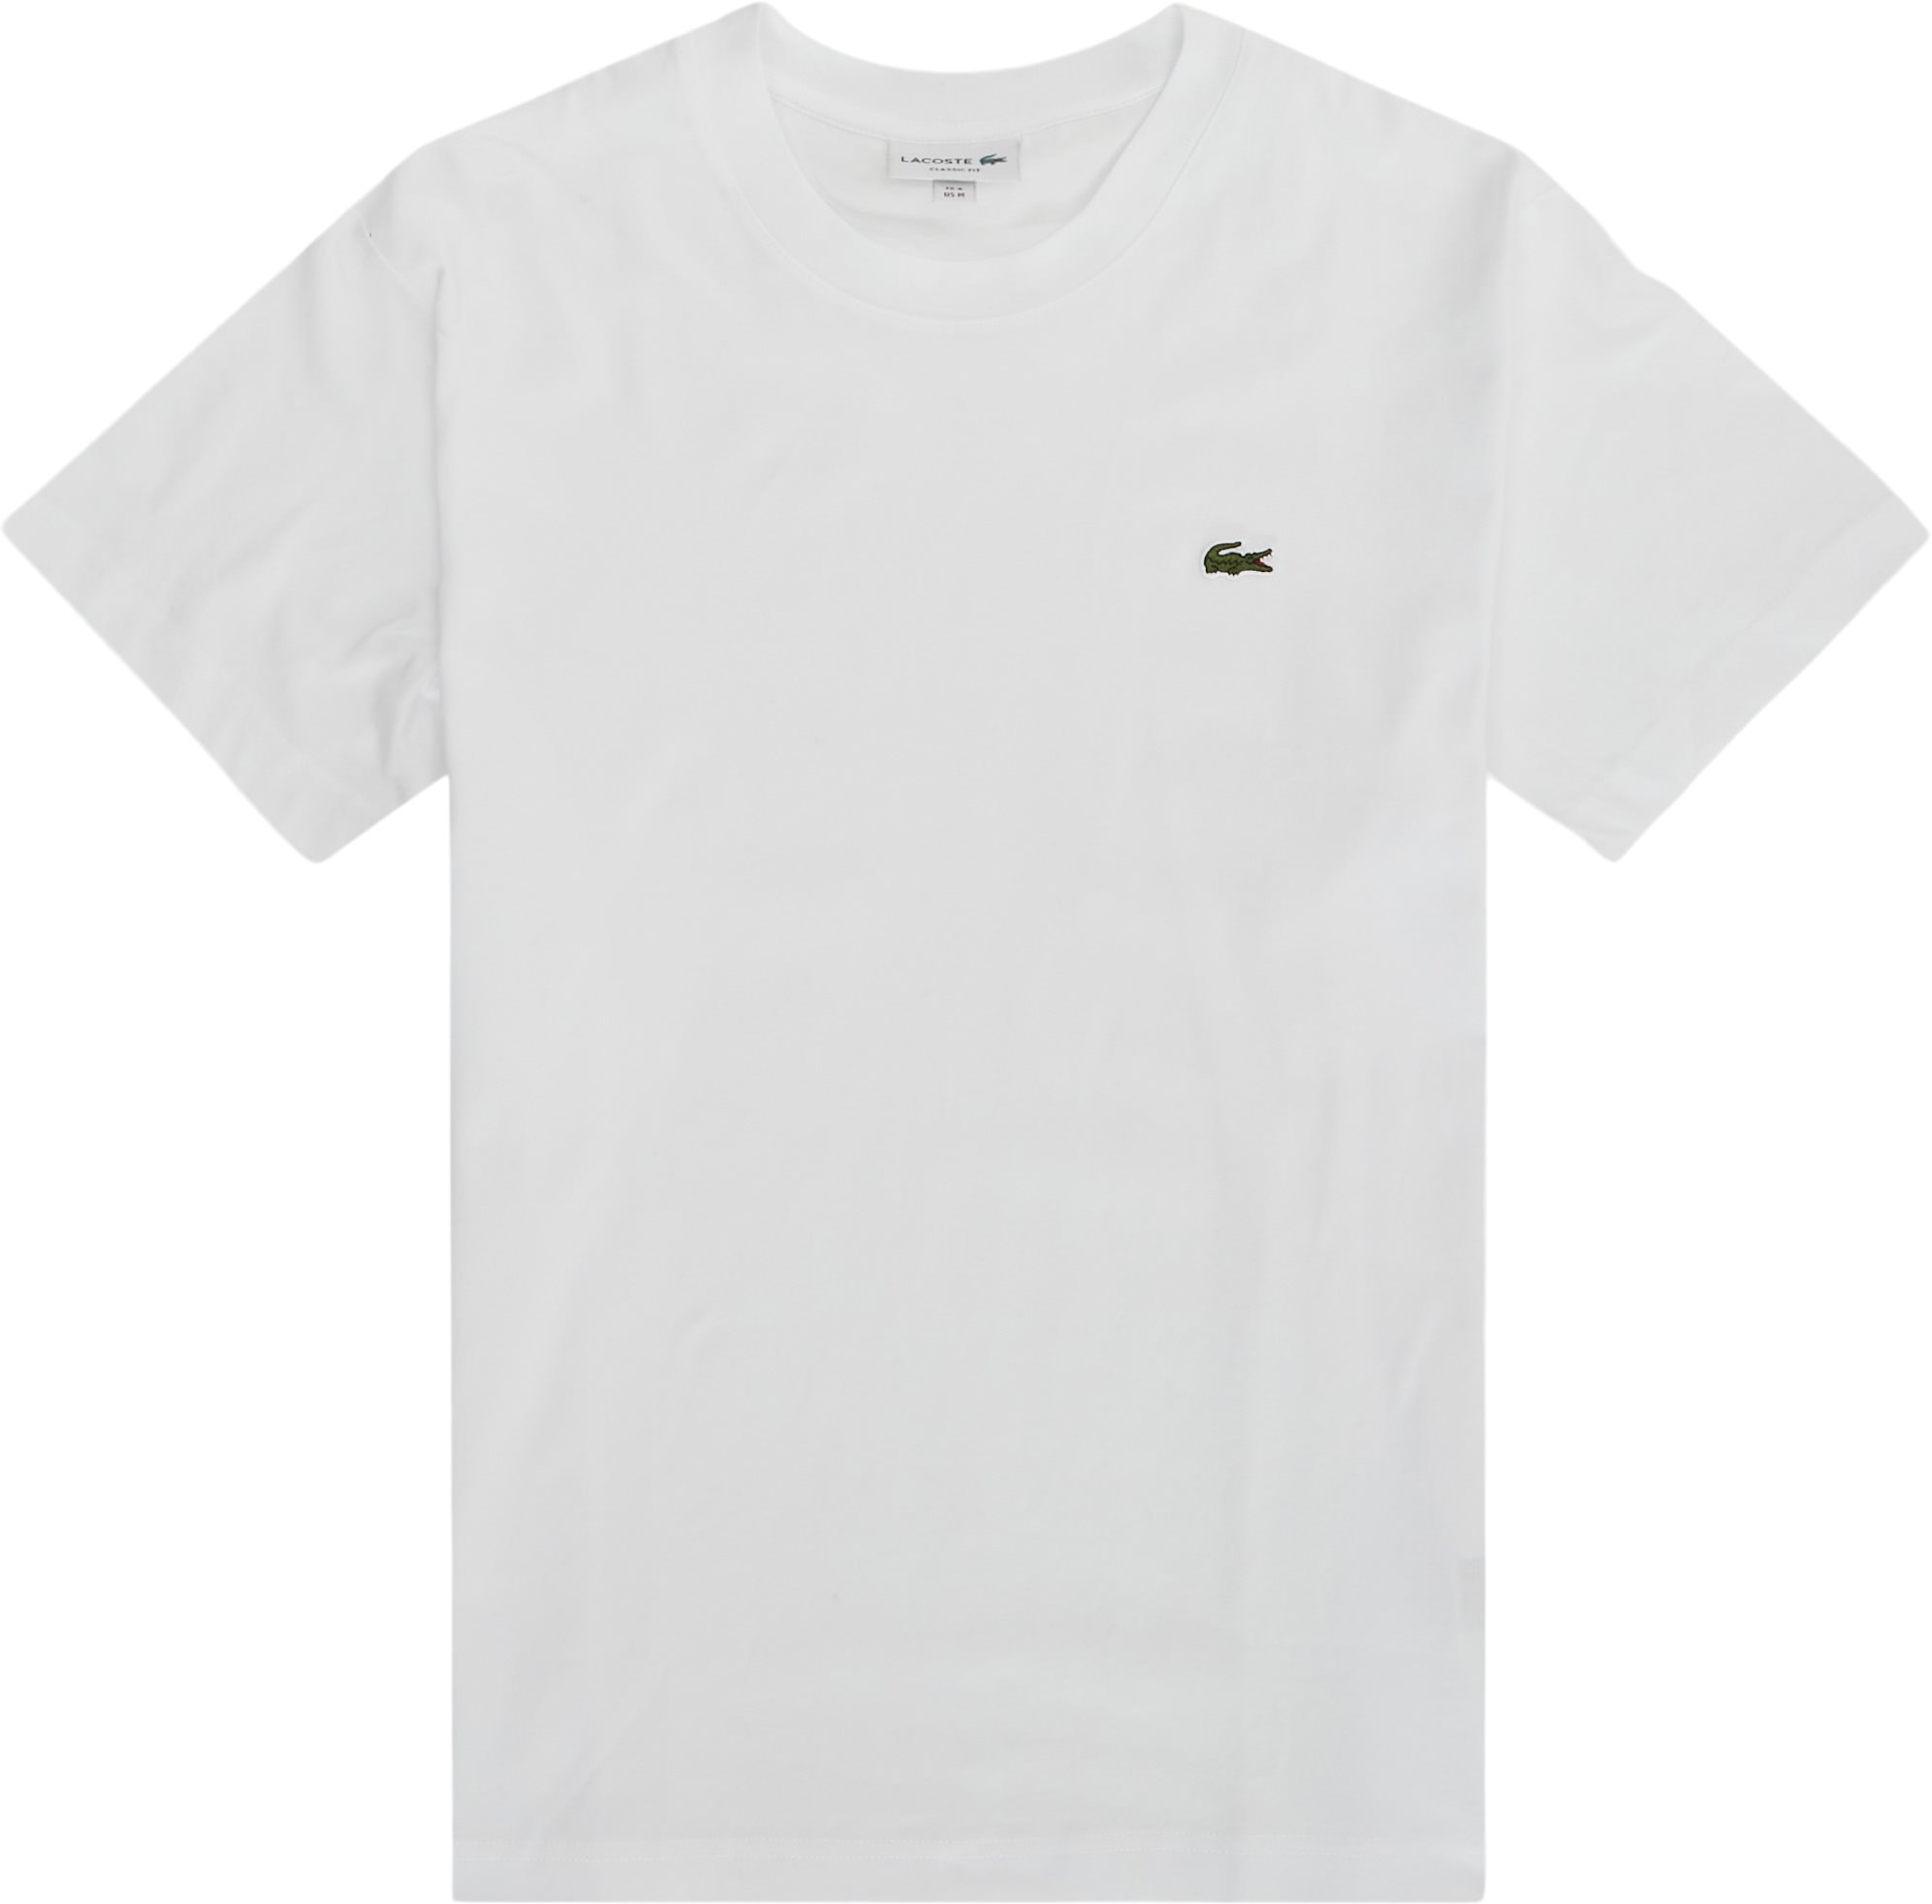 Lacoste T-shirts TH7318 White